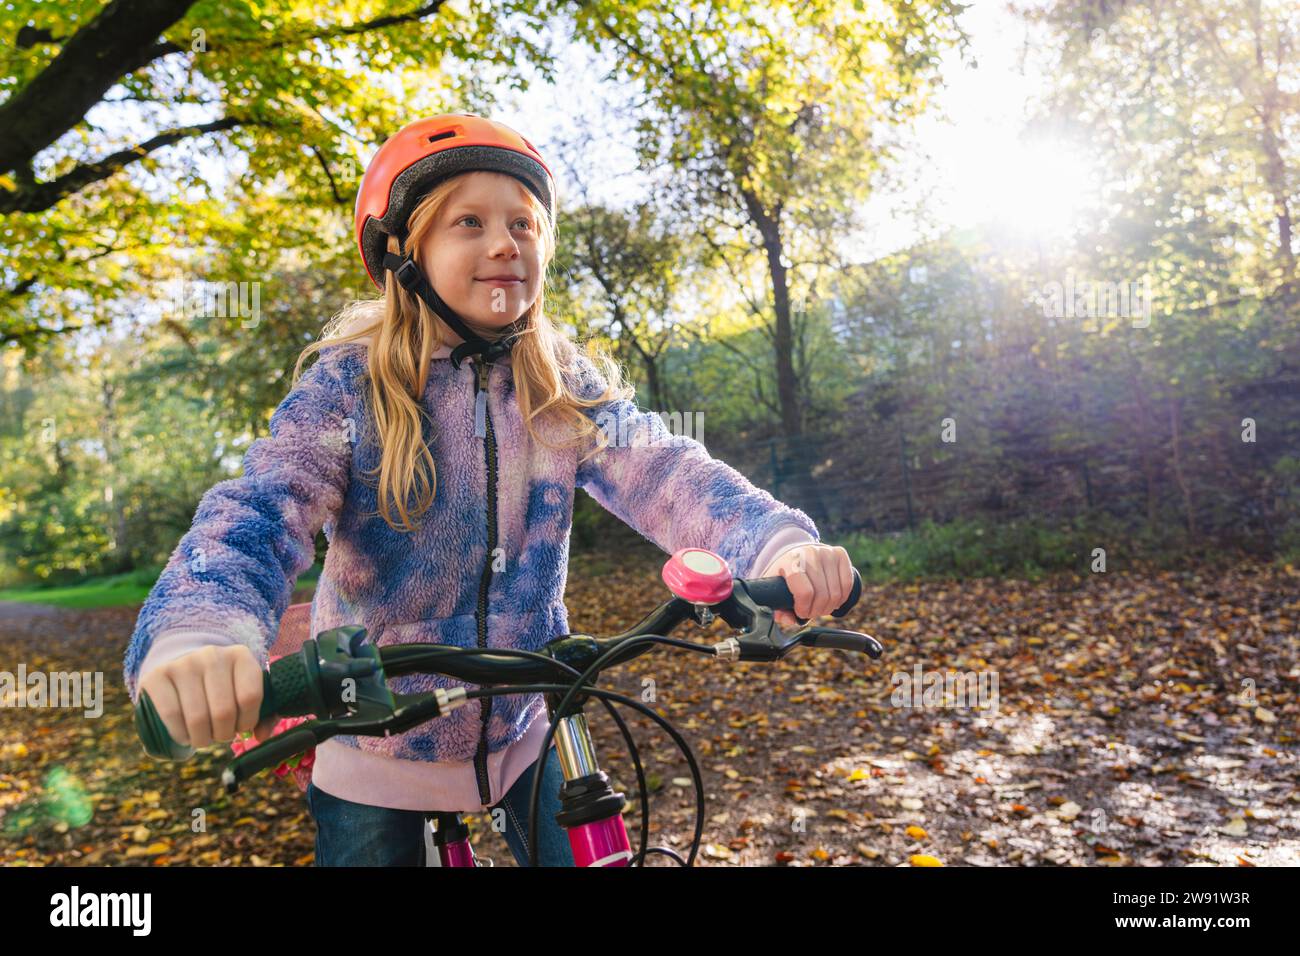 Girl cycling at park on sunny day Stock Photo